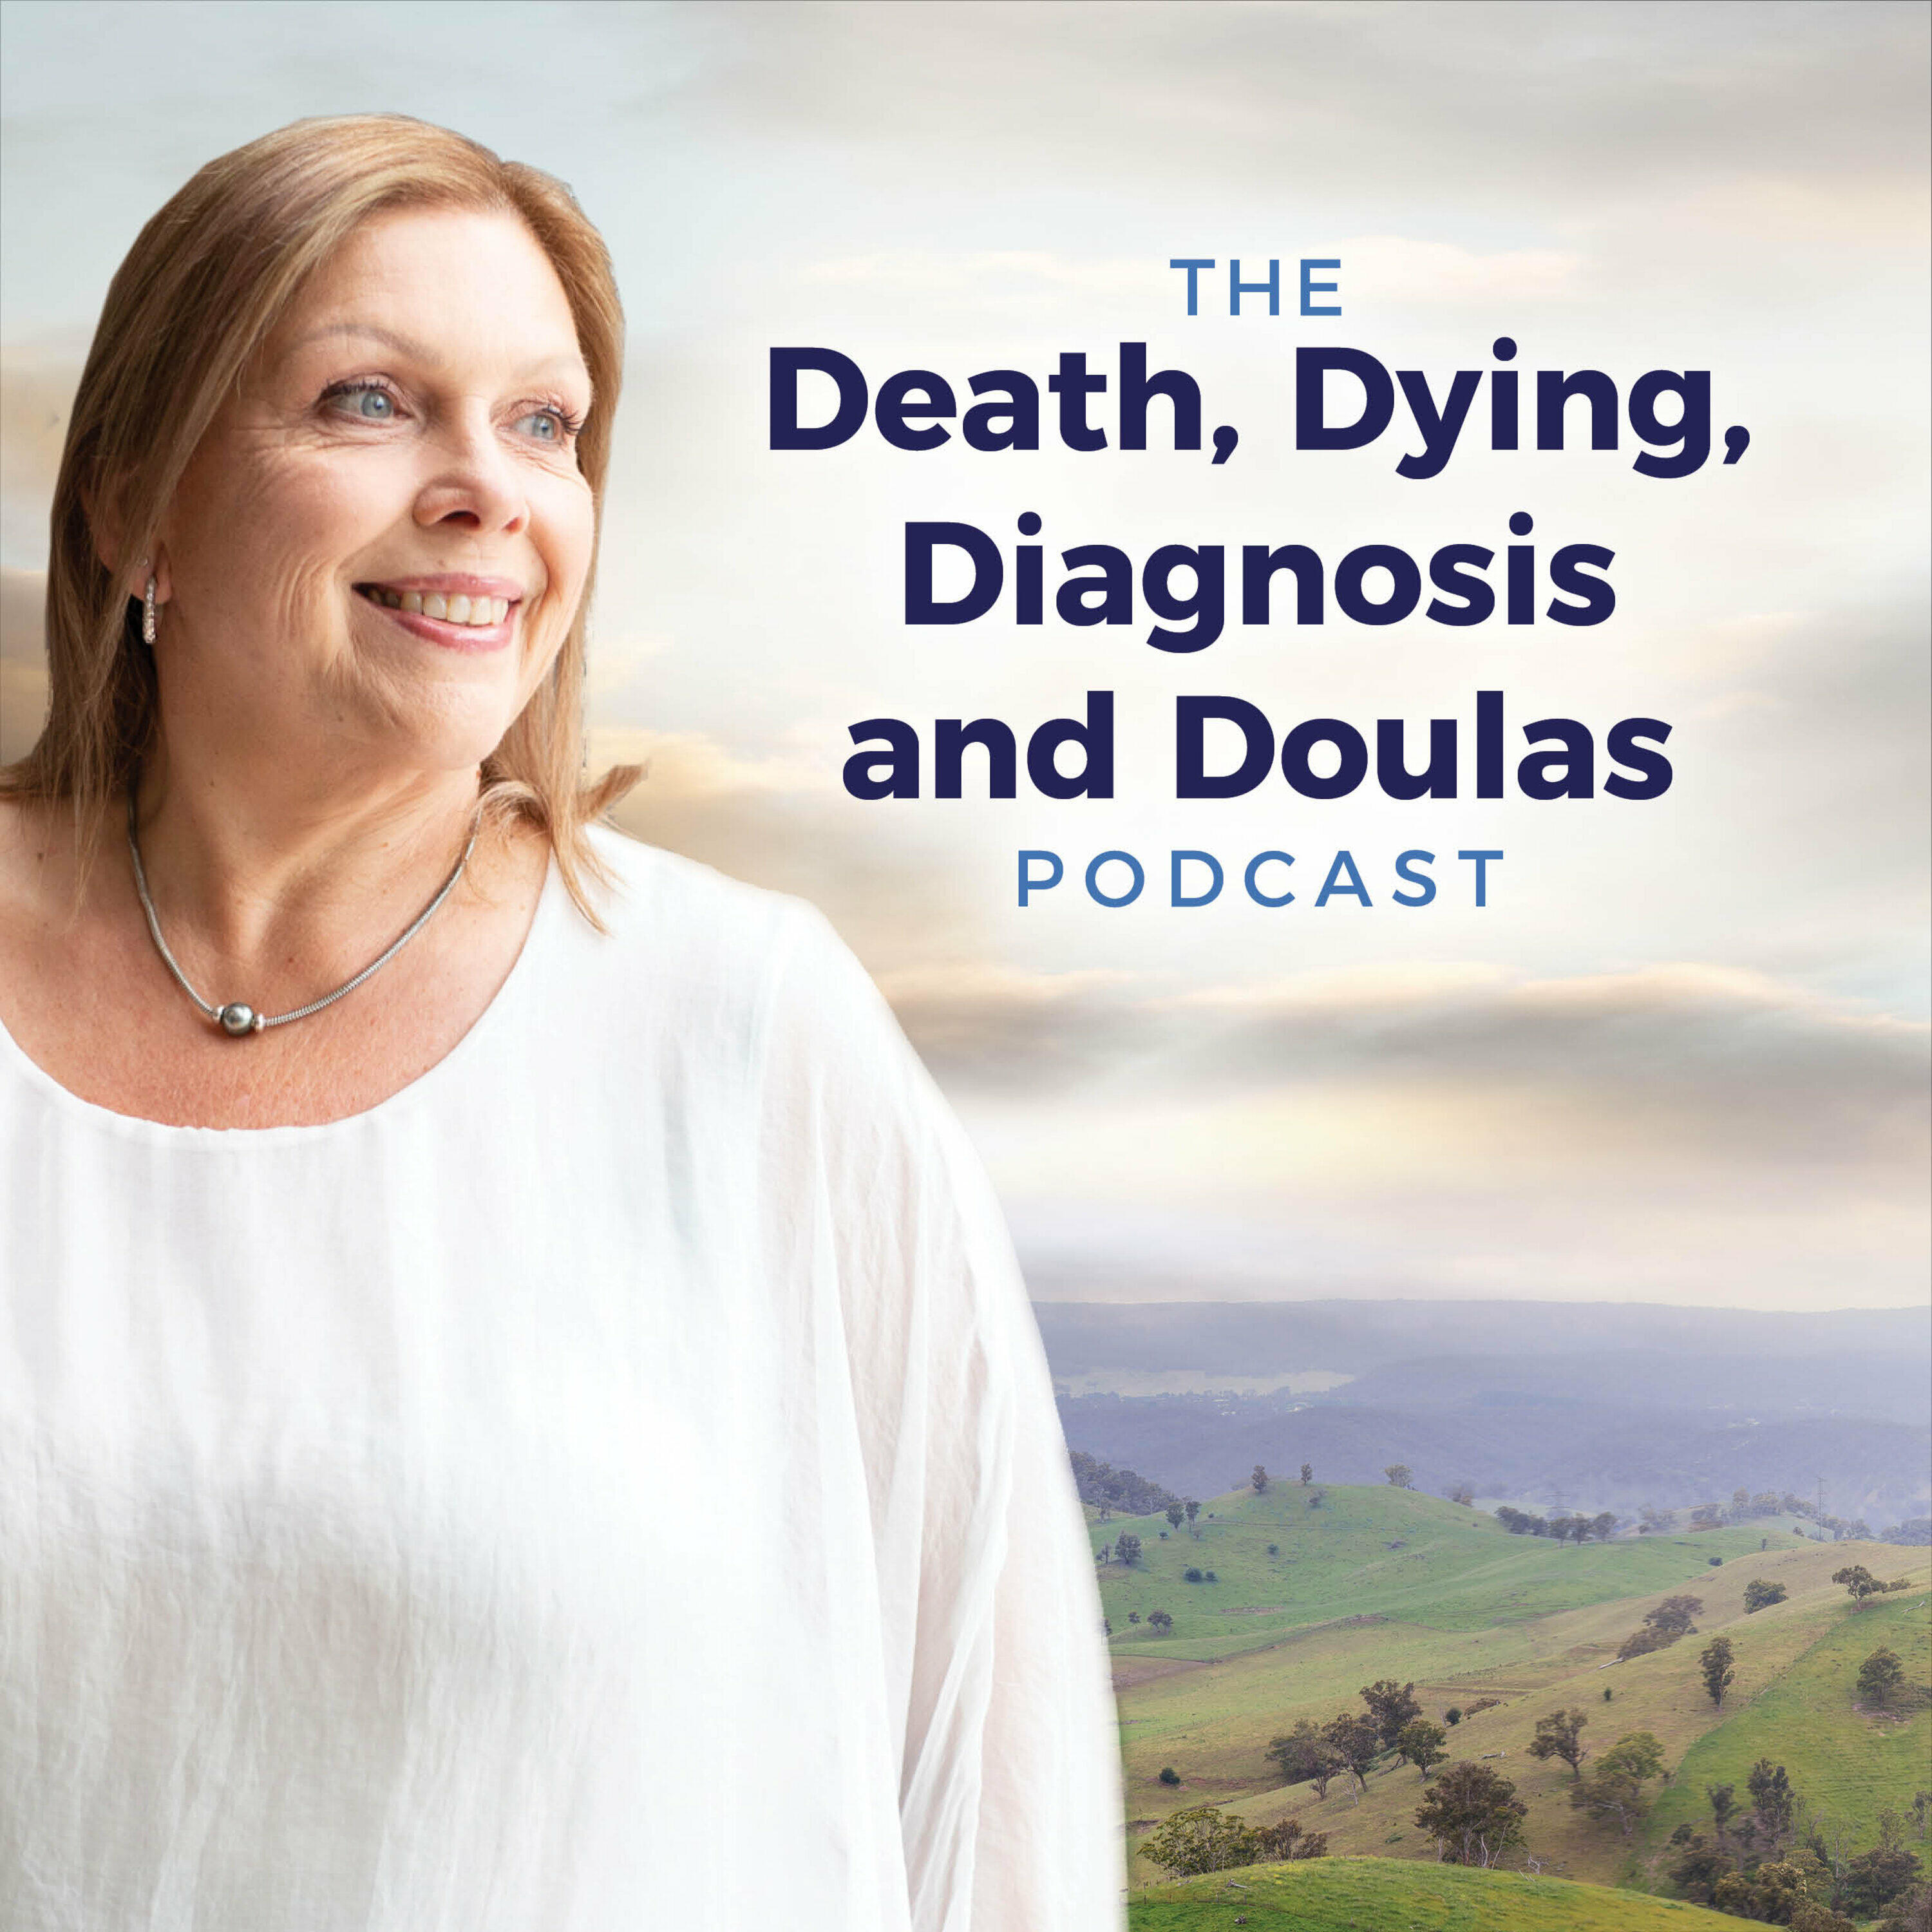 The Death, Dying, Diagnosis and Doulas Podcast by Julie Fletcher | iHeart